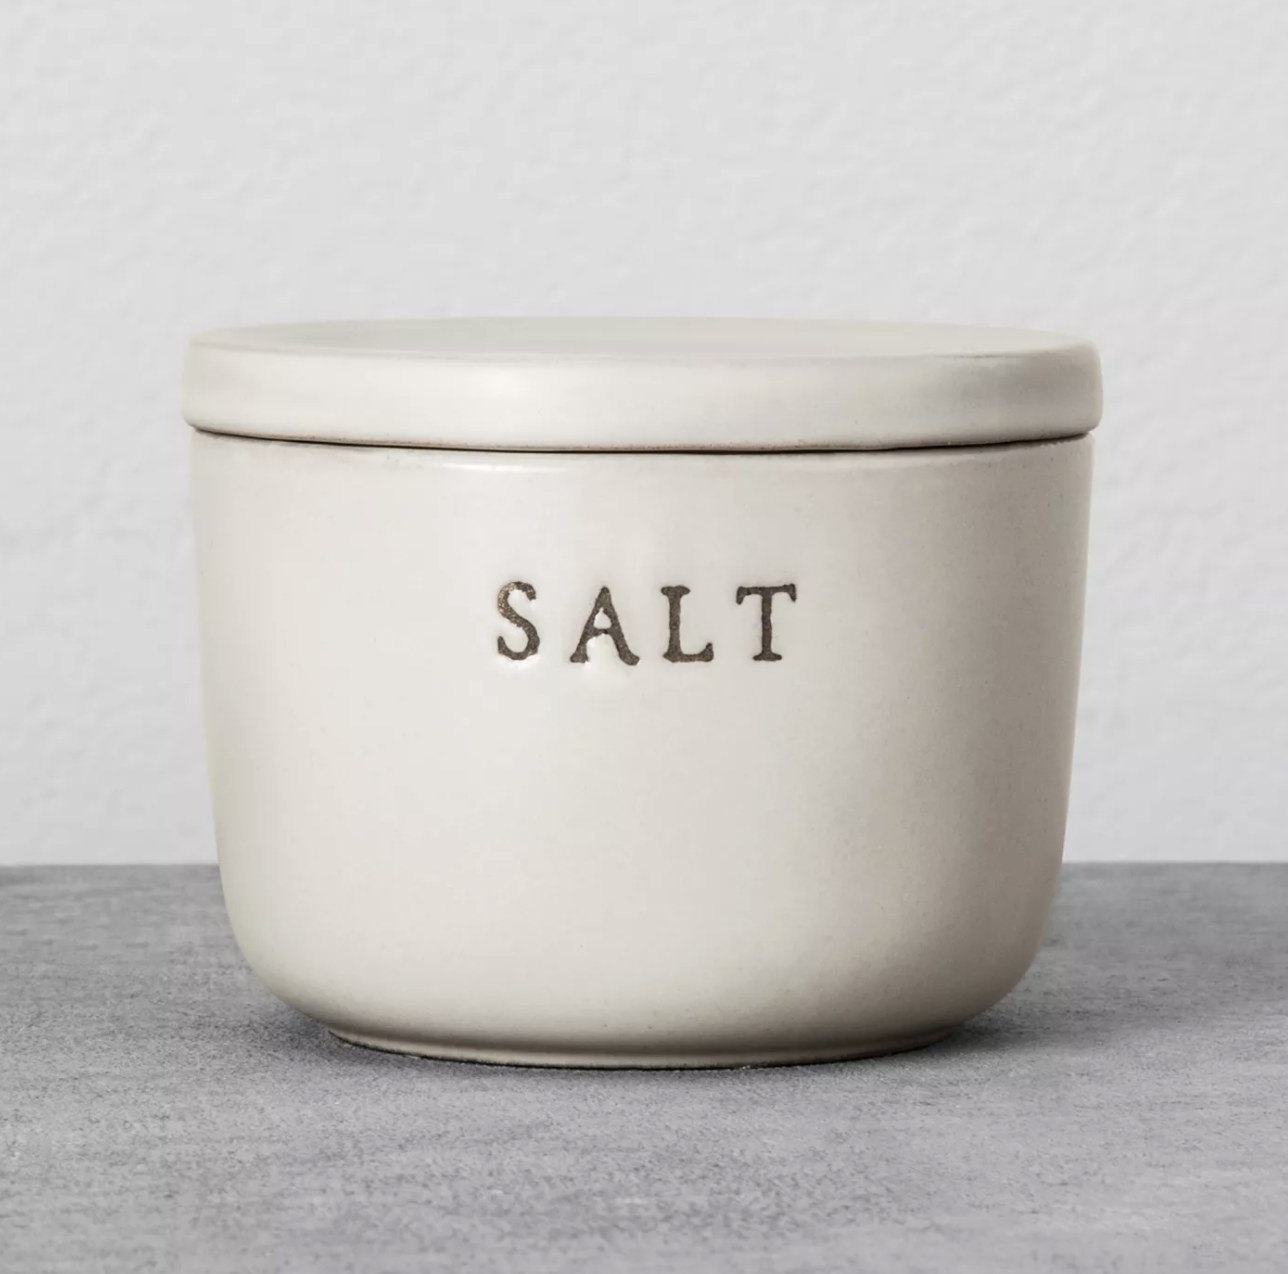 Salt container on counter